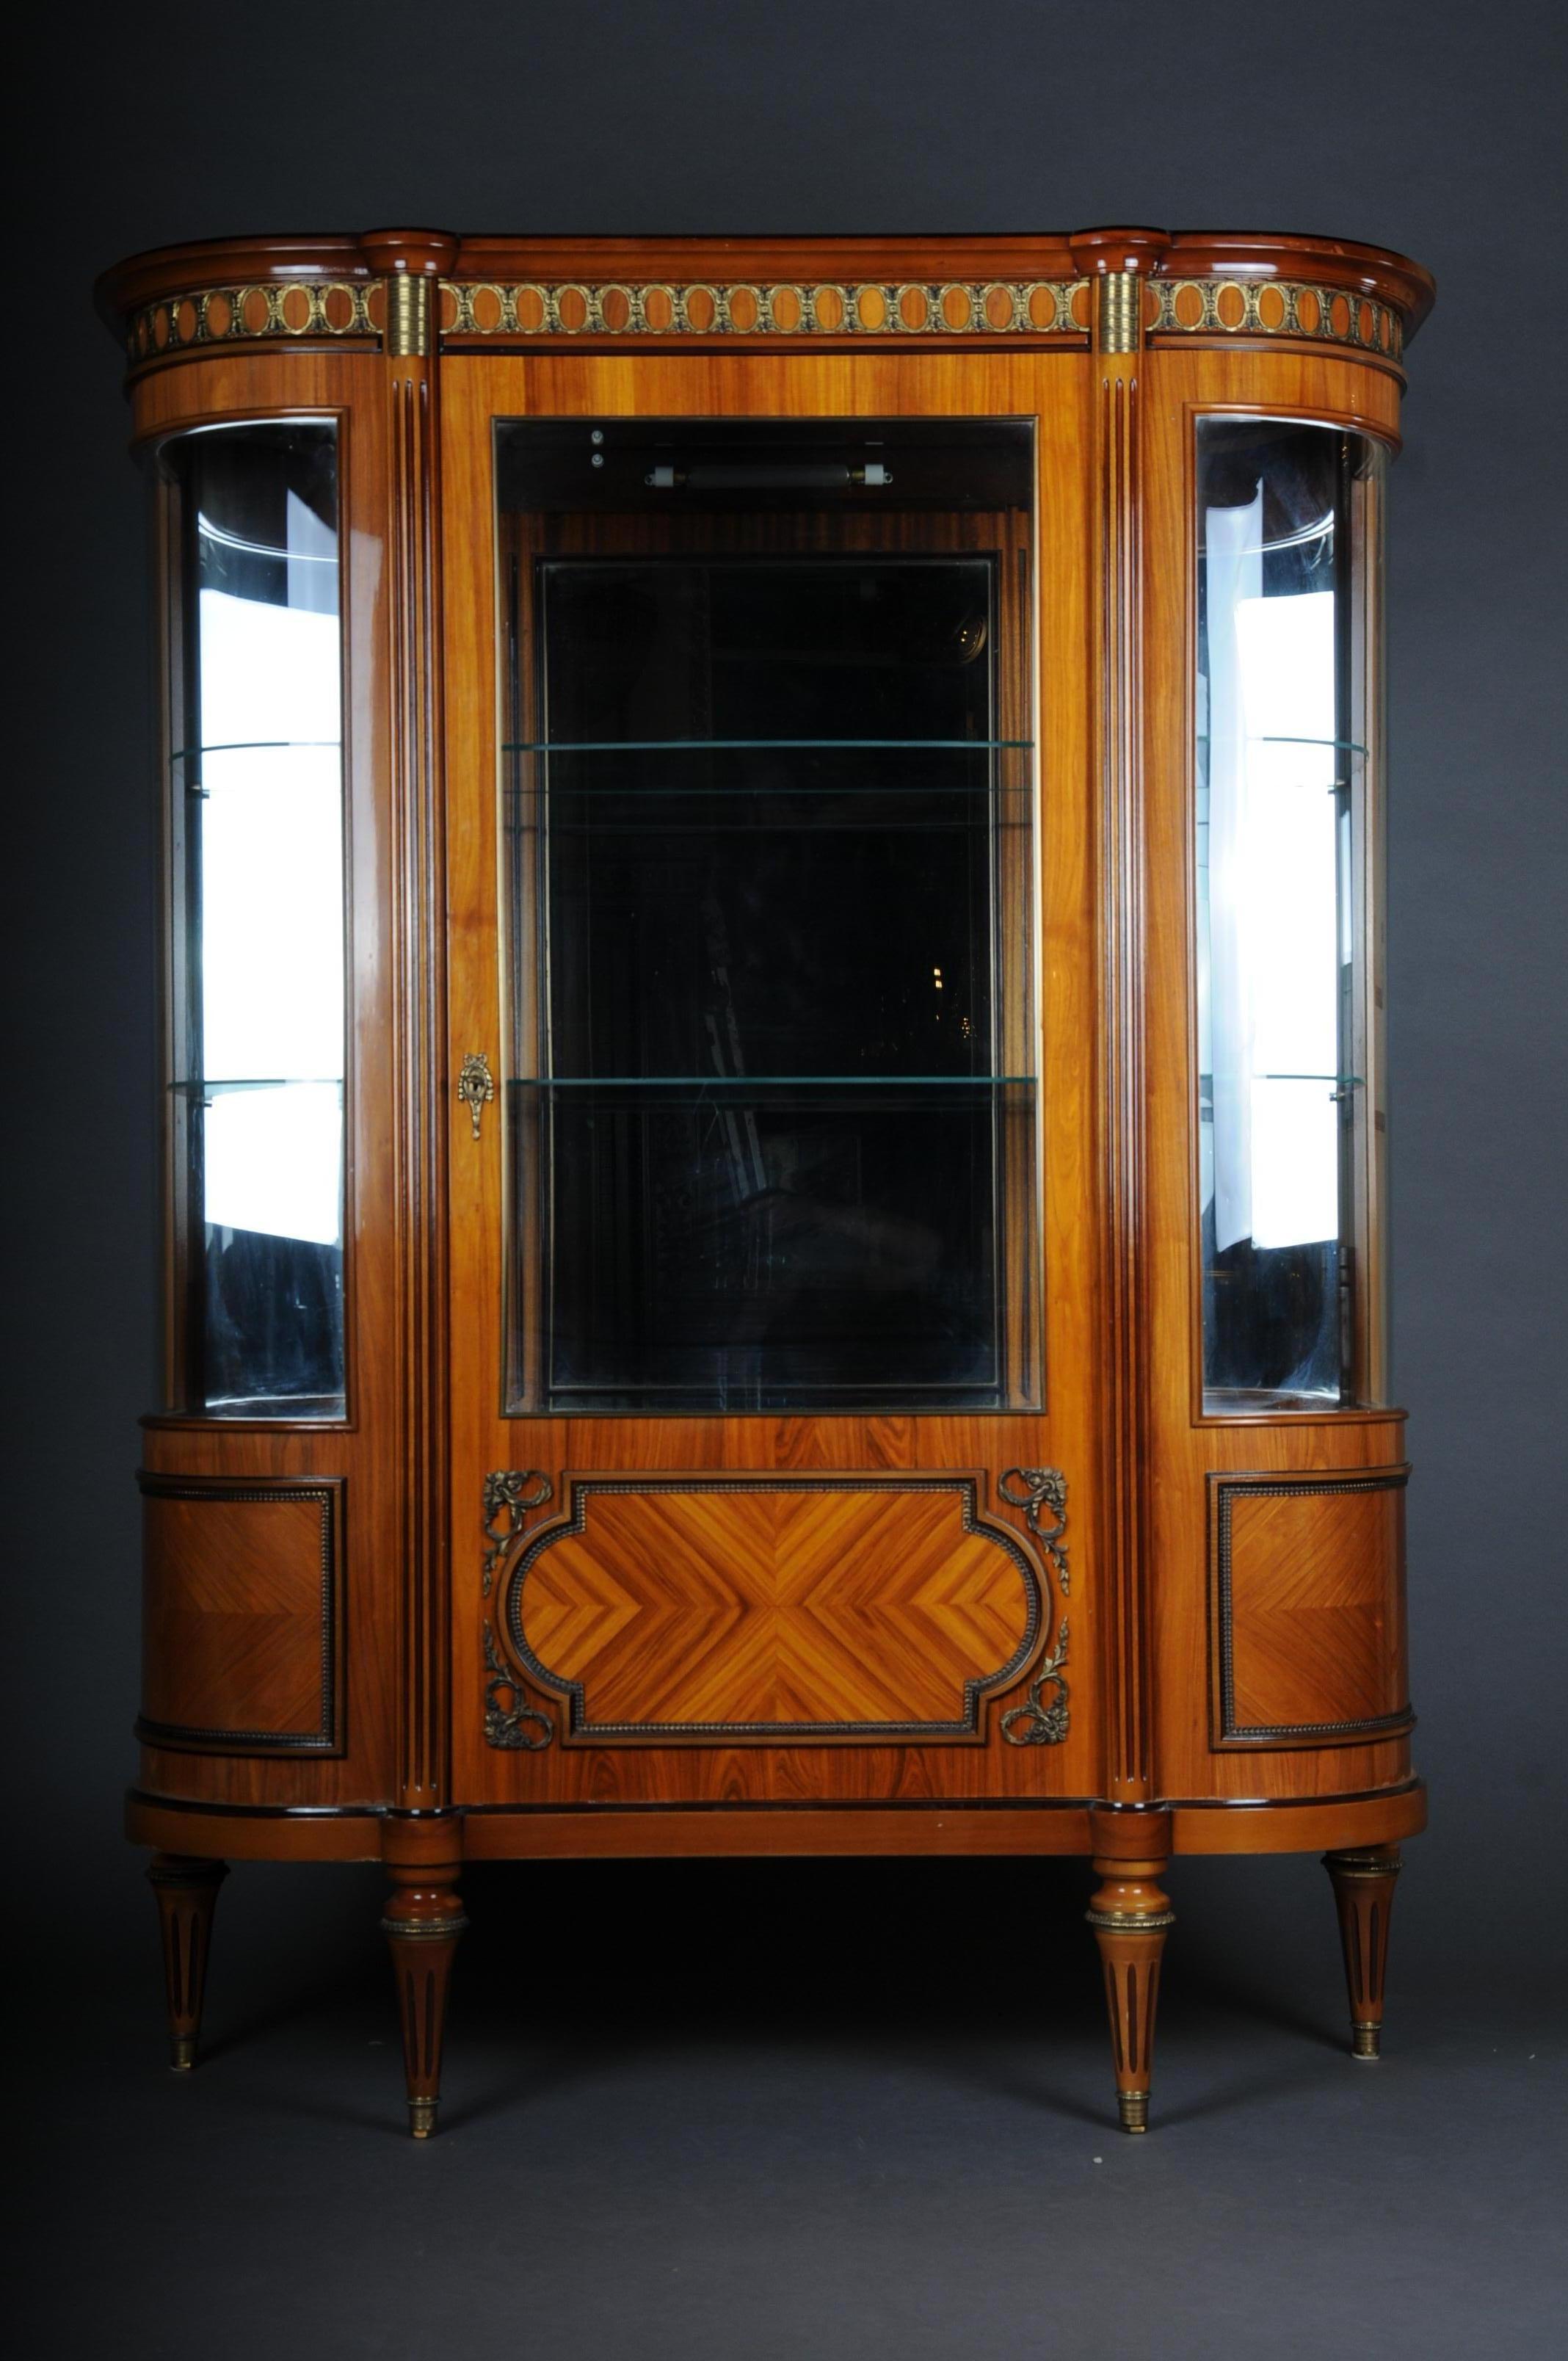 20th century magnificent French Louis XVI style display cabinet

Bois-Satiné veneer, all-round surface-covering mirror veneer on wood. Upright rectangular and rounded, glazed on three sides, body on conical legs. Lockable with one door. The